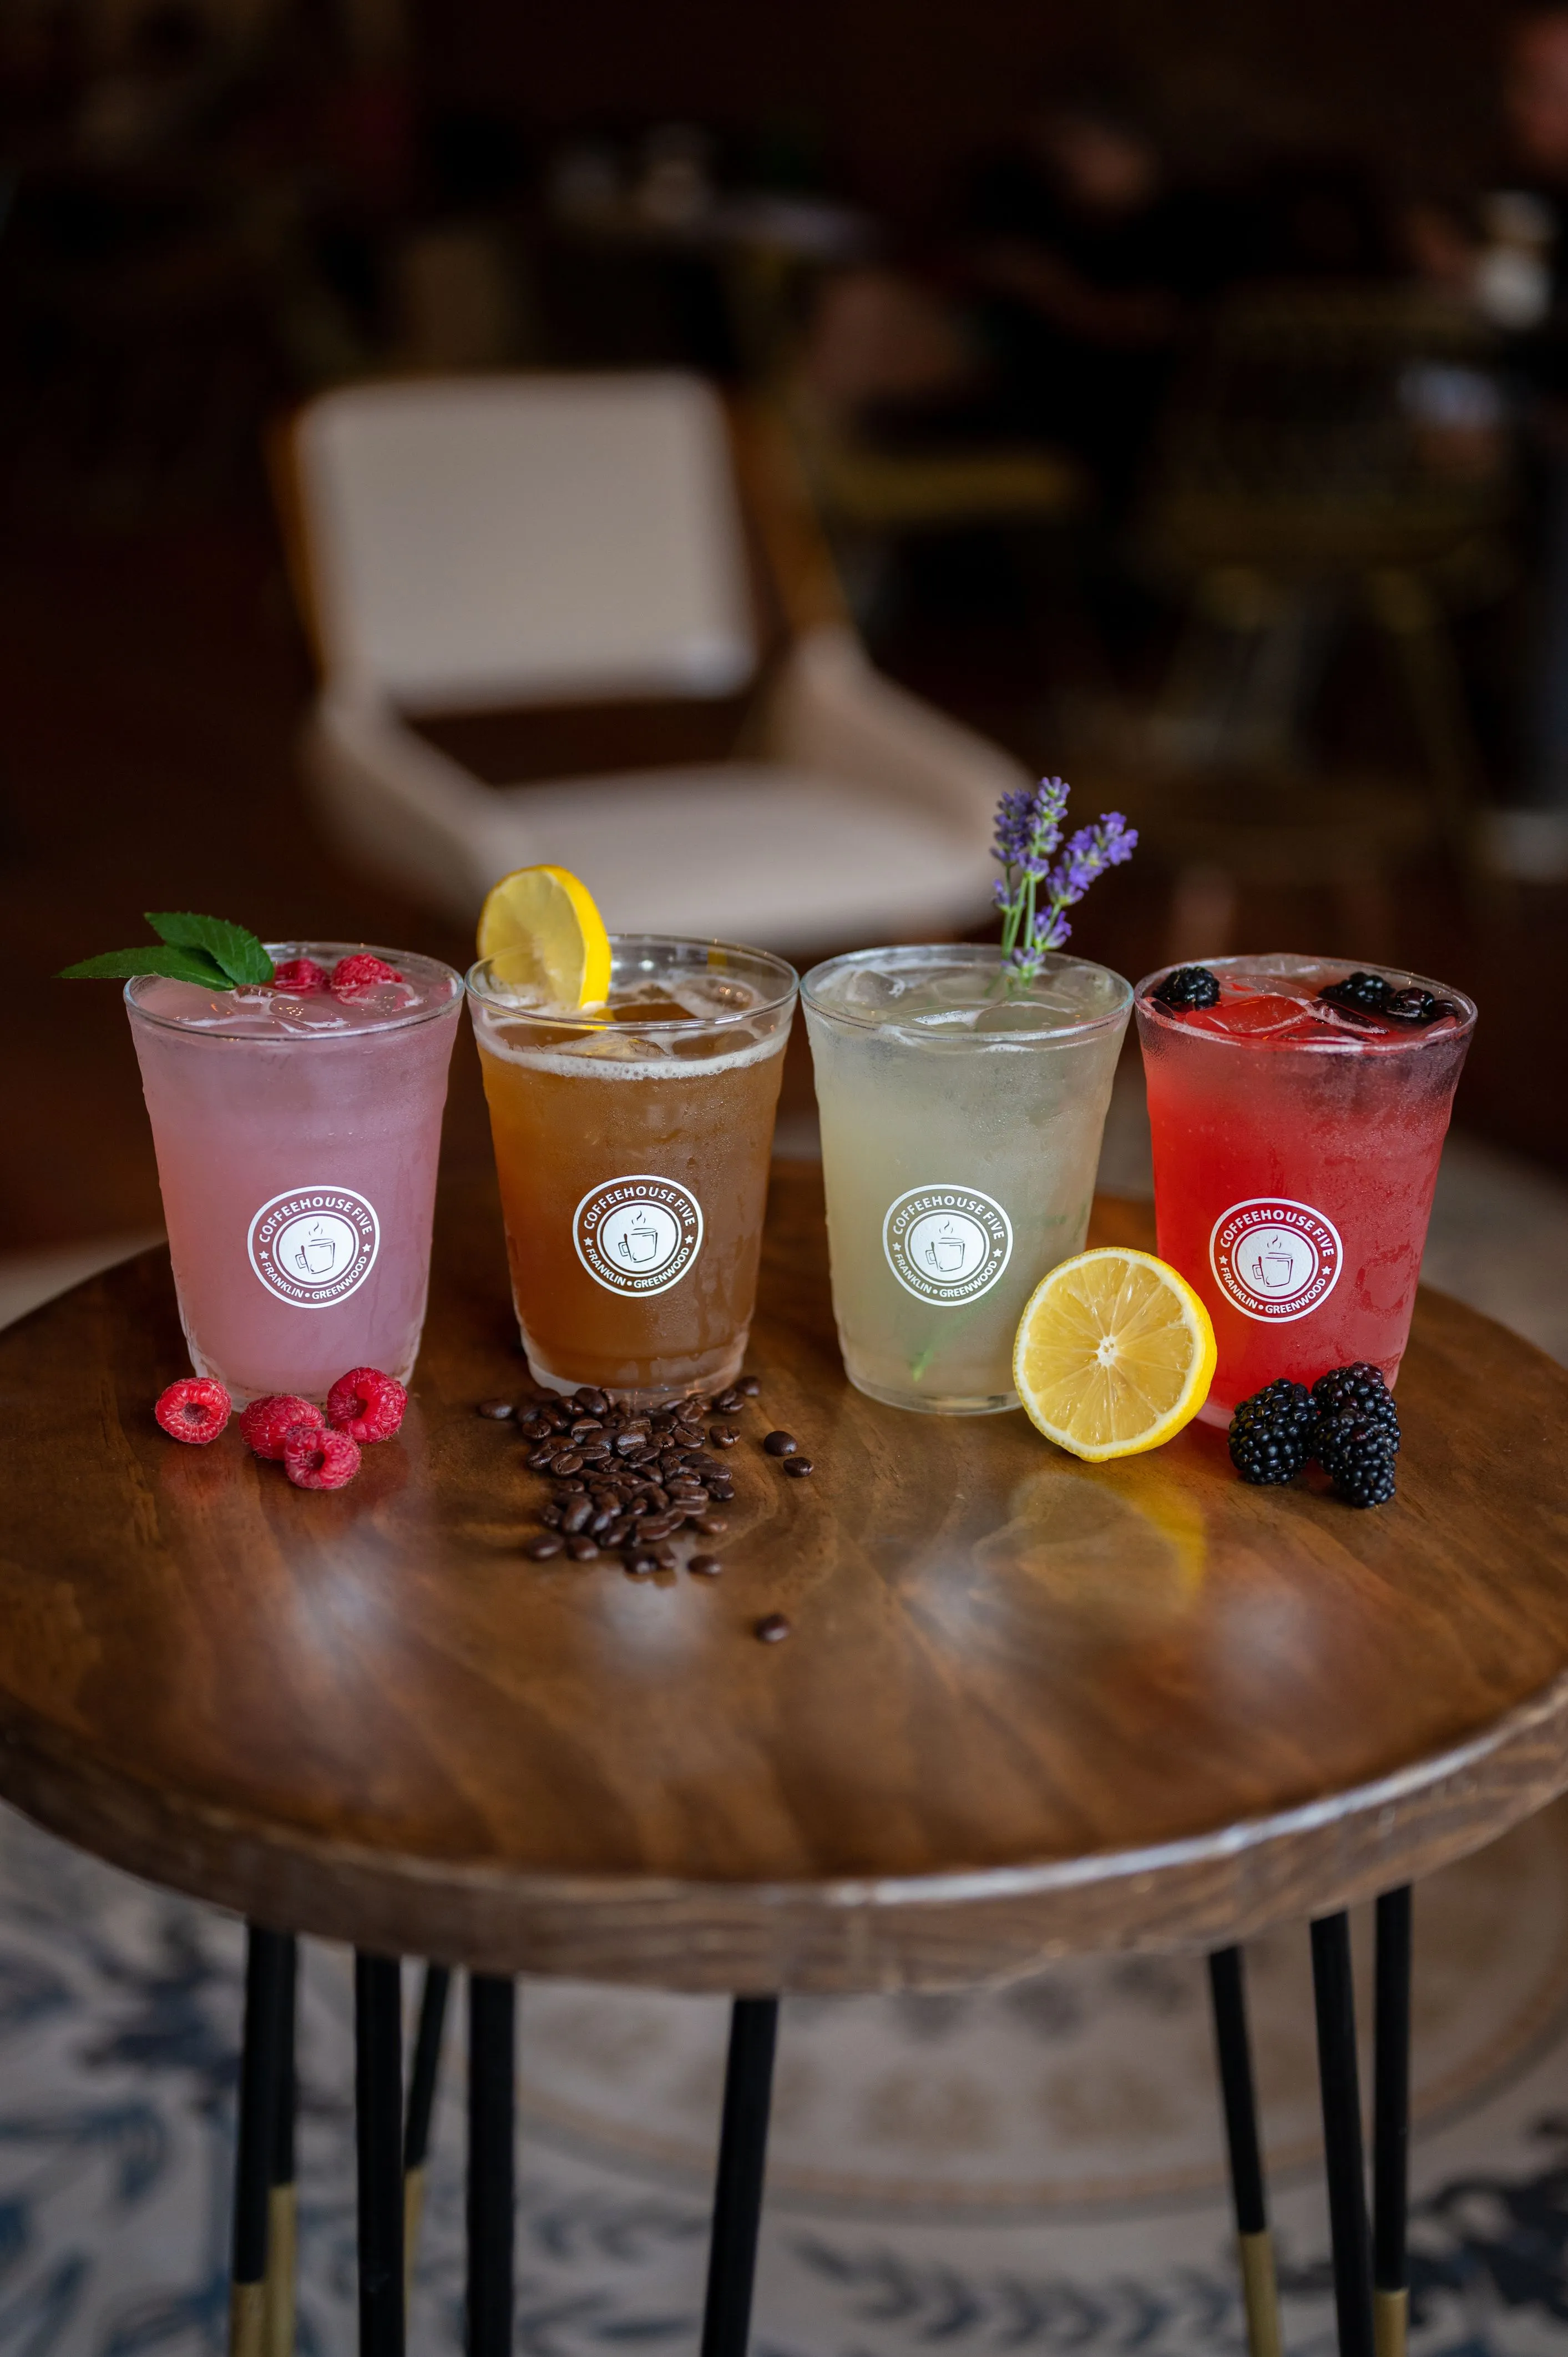 Four assorted flavored iced beverages on a wooden table, each garnished with different items such as raspberries, a lemon slice, lavender, and blackberries, with scattered coffee beans on the table.